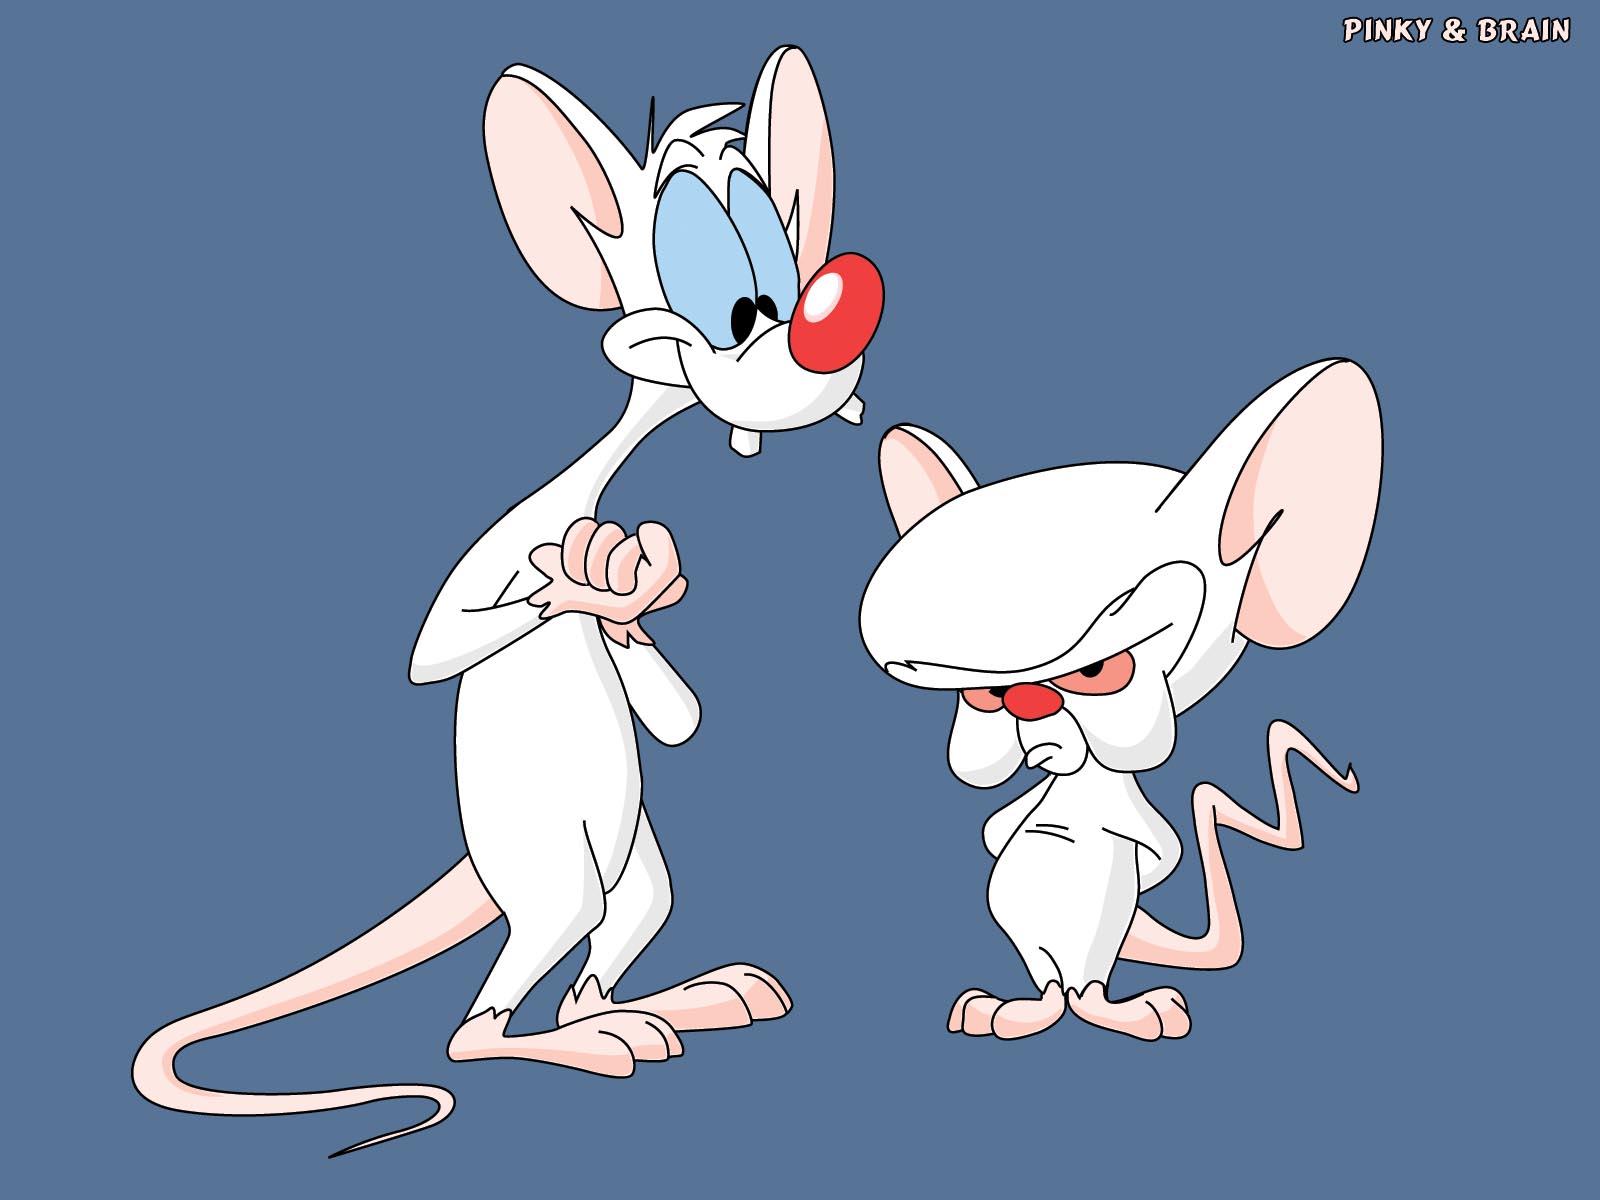 High Quality Pinky and the brain Blank Meme Template